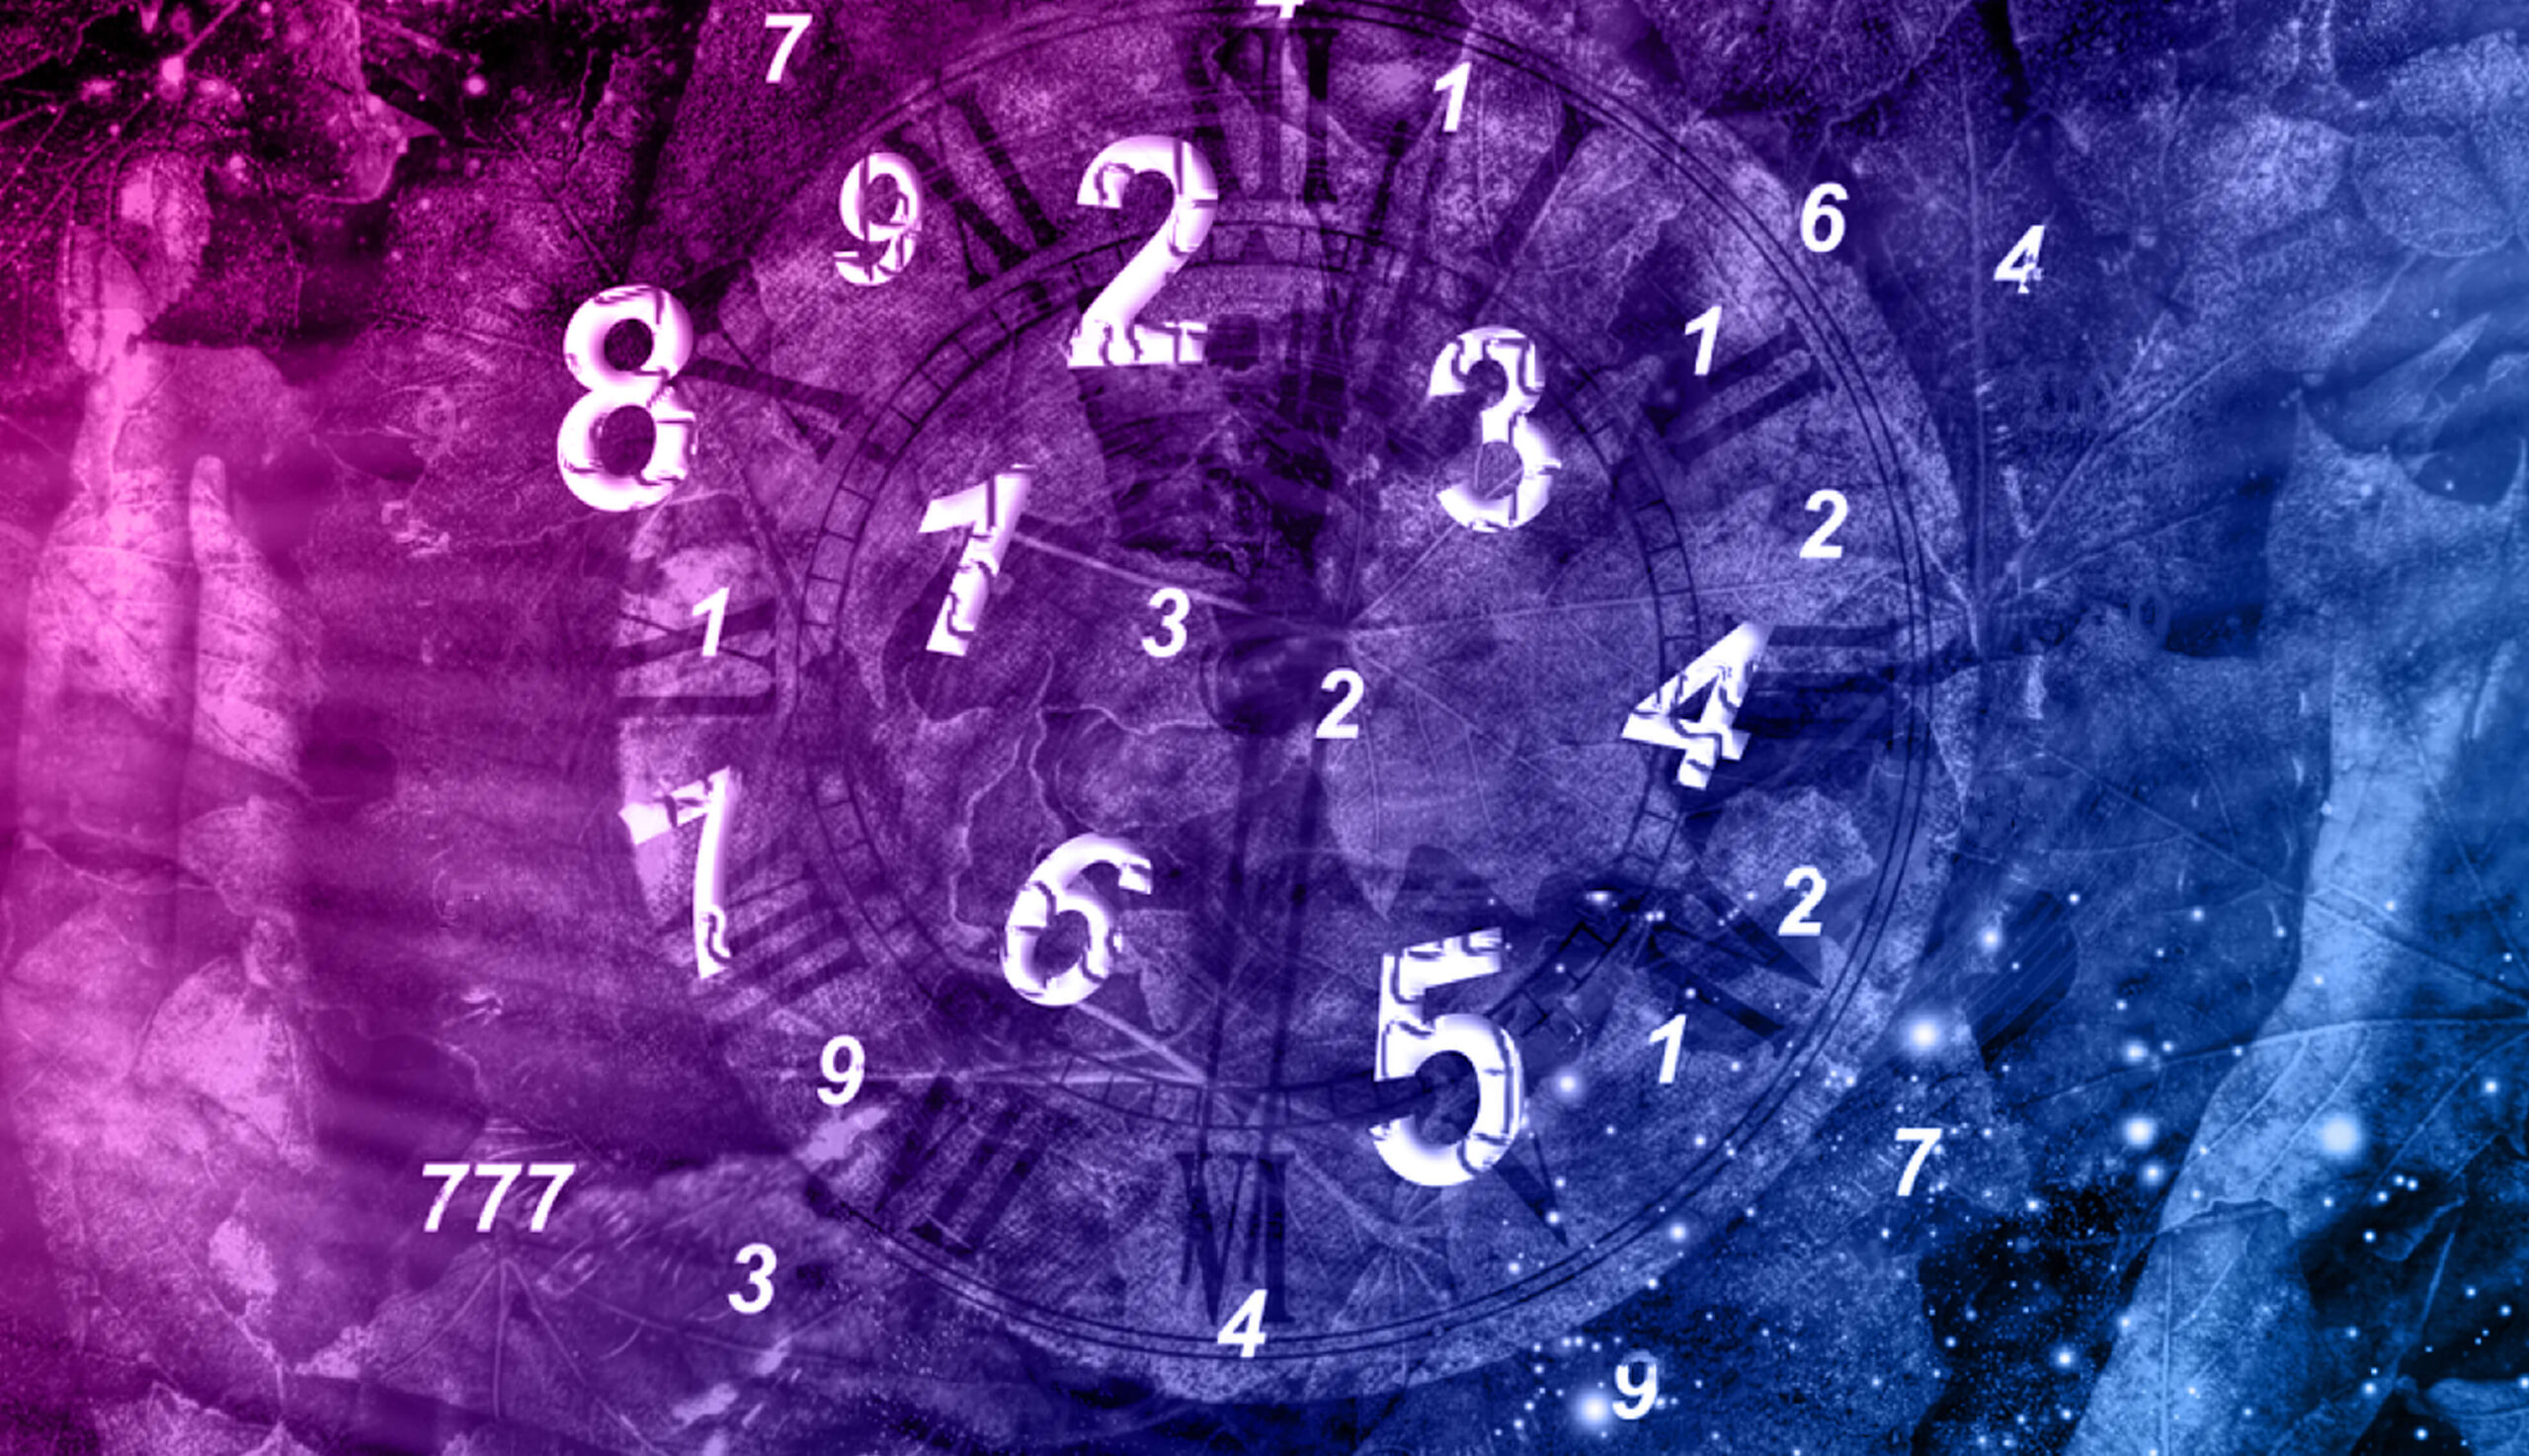 The numerology of odd and even numbers unveiling the hidden symbolism scaled